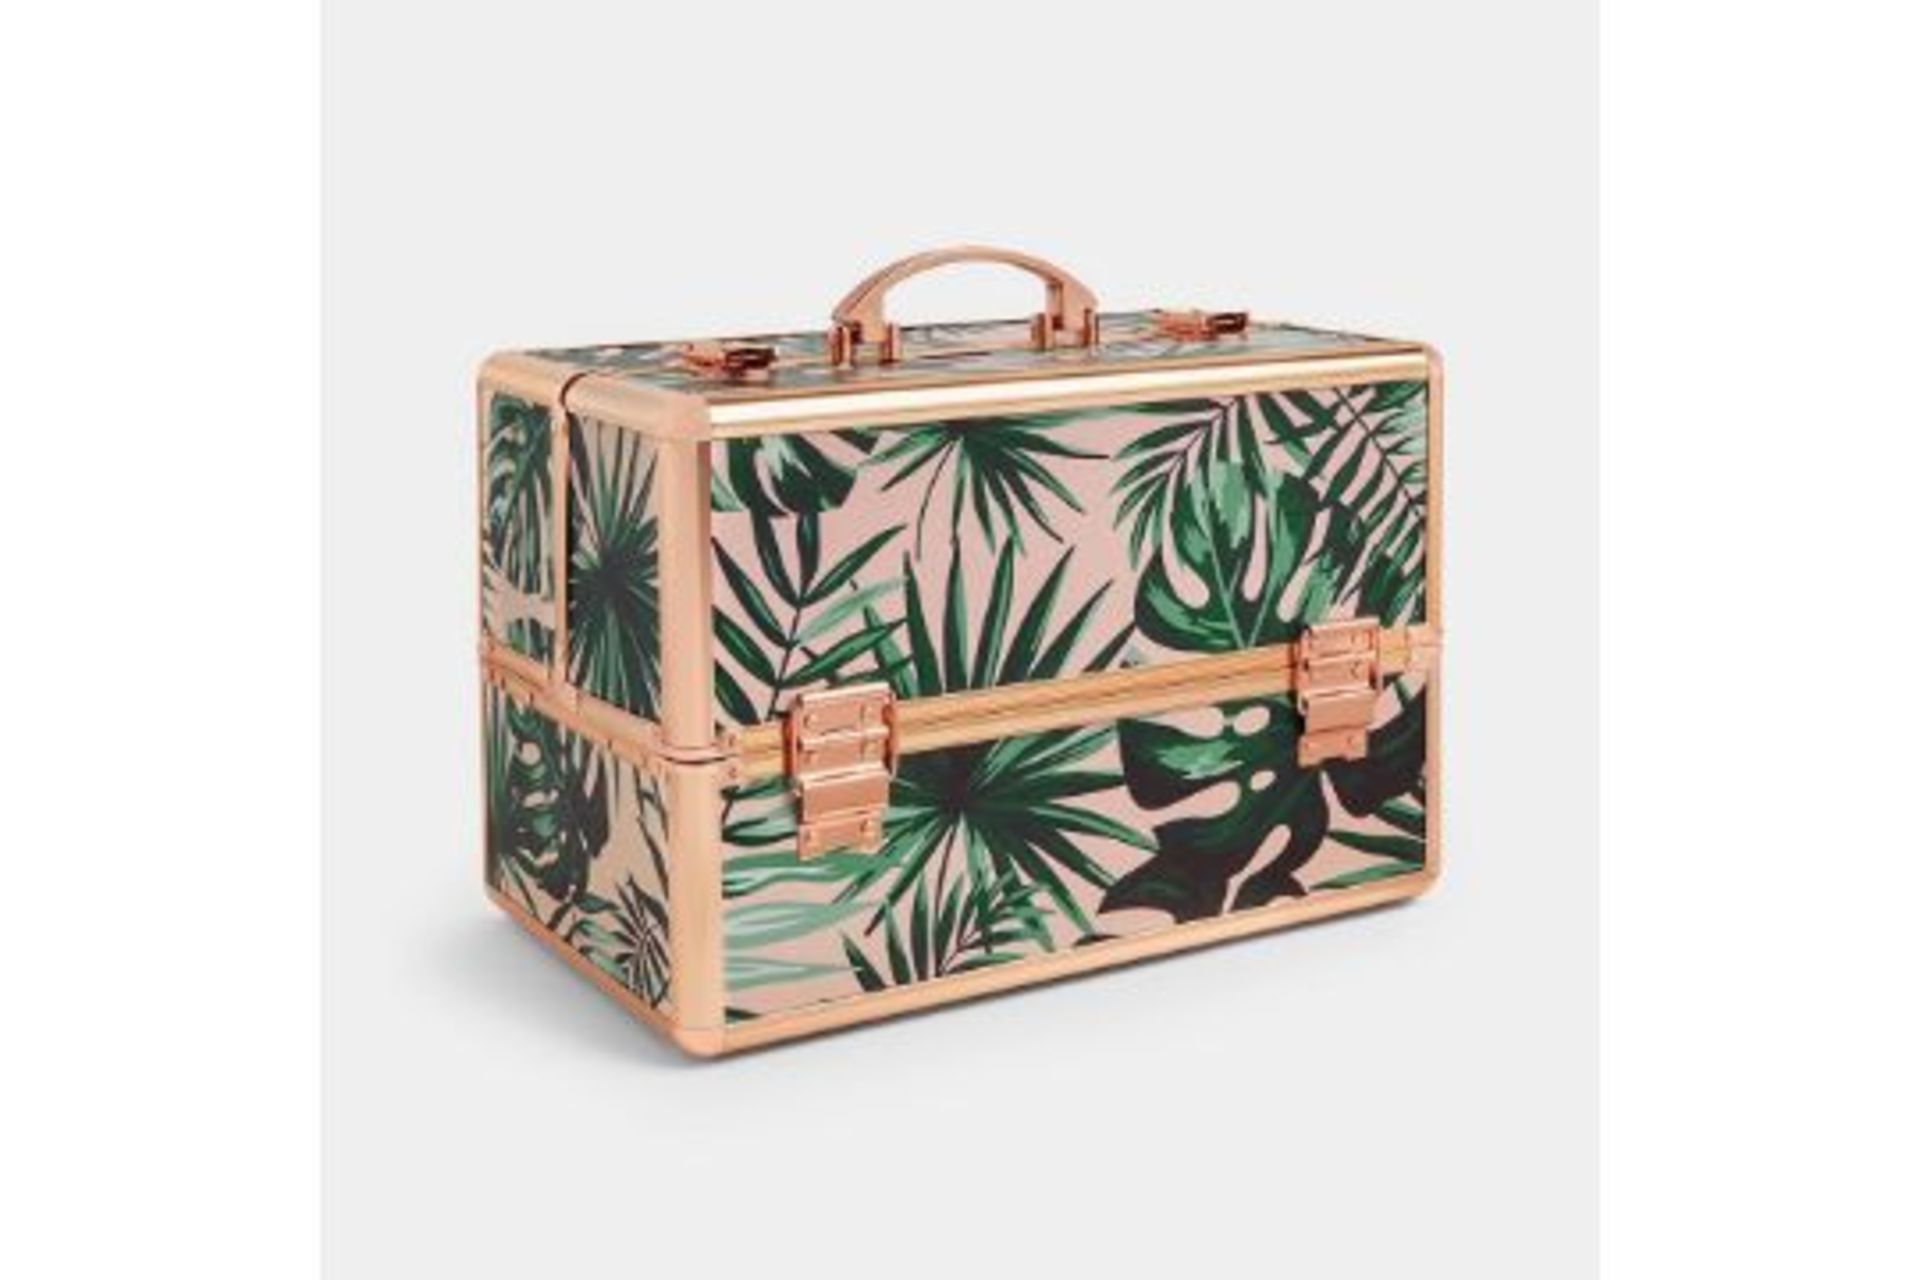 ER51 -Large Tropical Beauty Case. With sections that fold out, as well as handy dividers to create